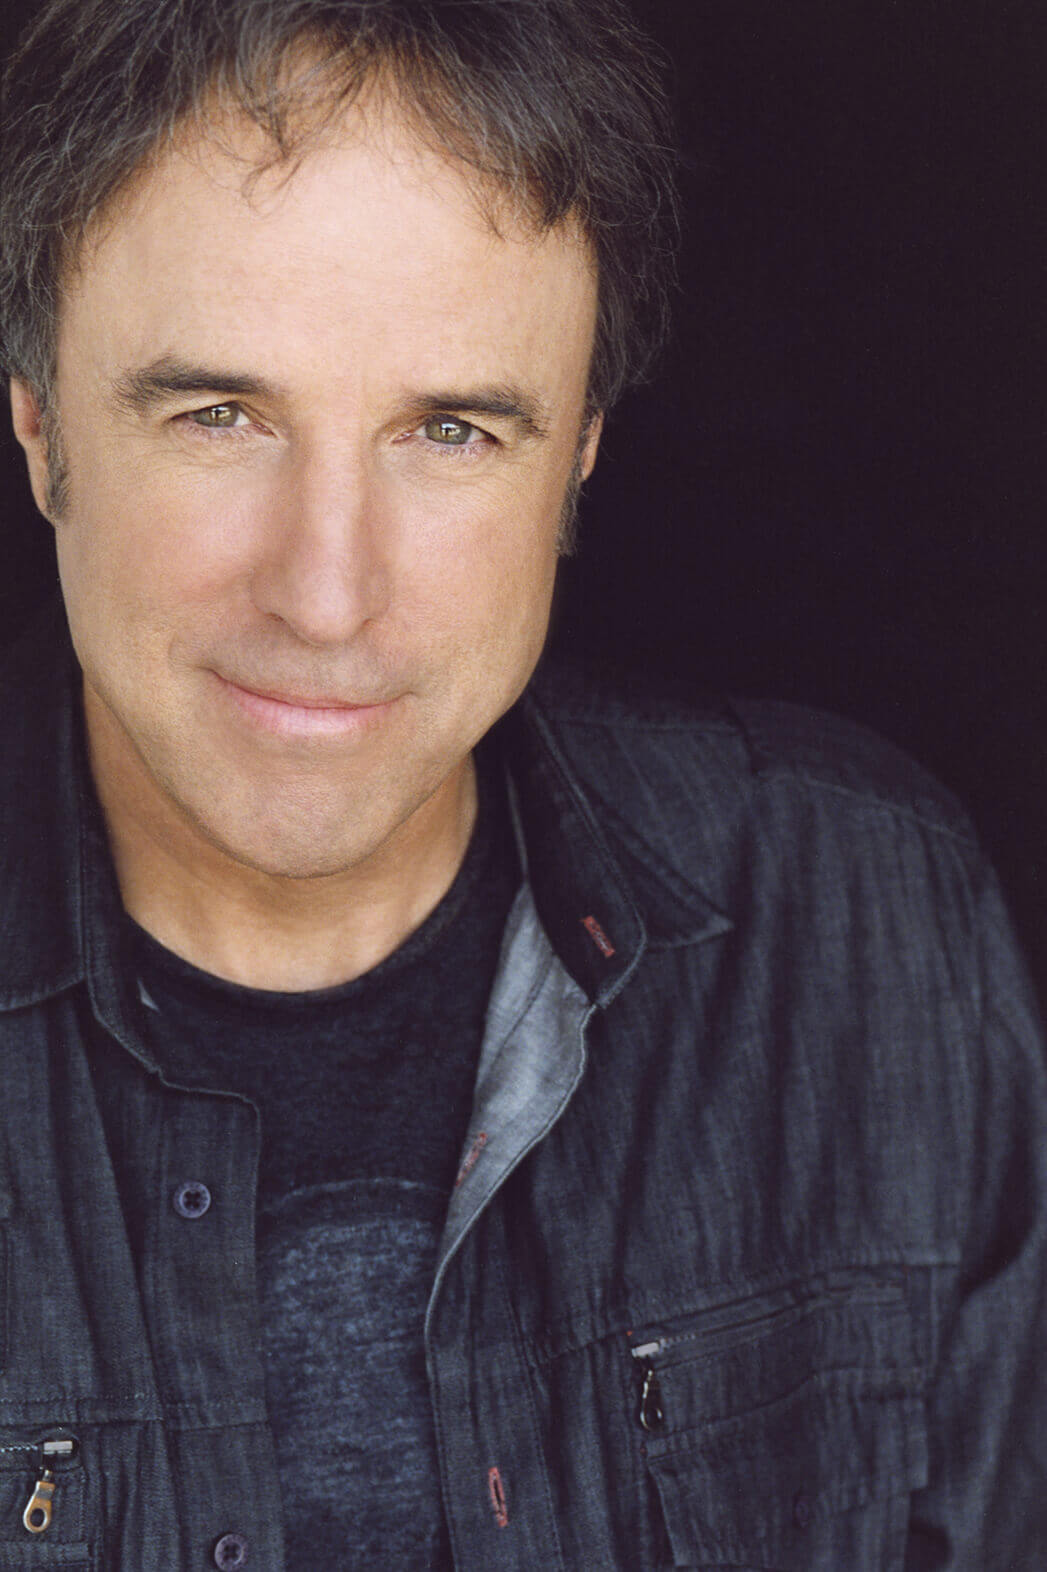 Karina Kapur Sax - Hire Actor and Comedian Kevin Nealon for Your Event | PDA Speakers